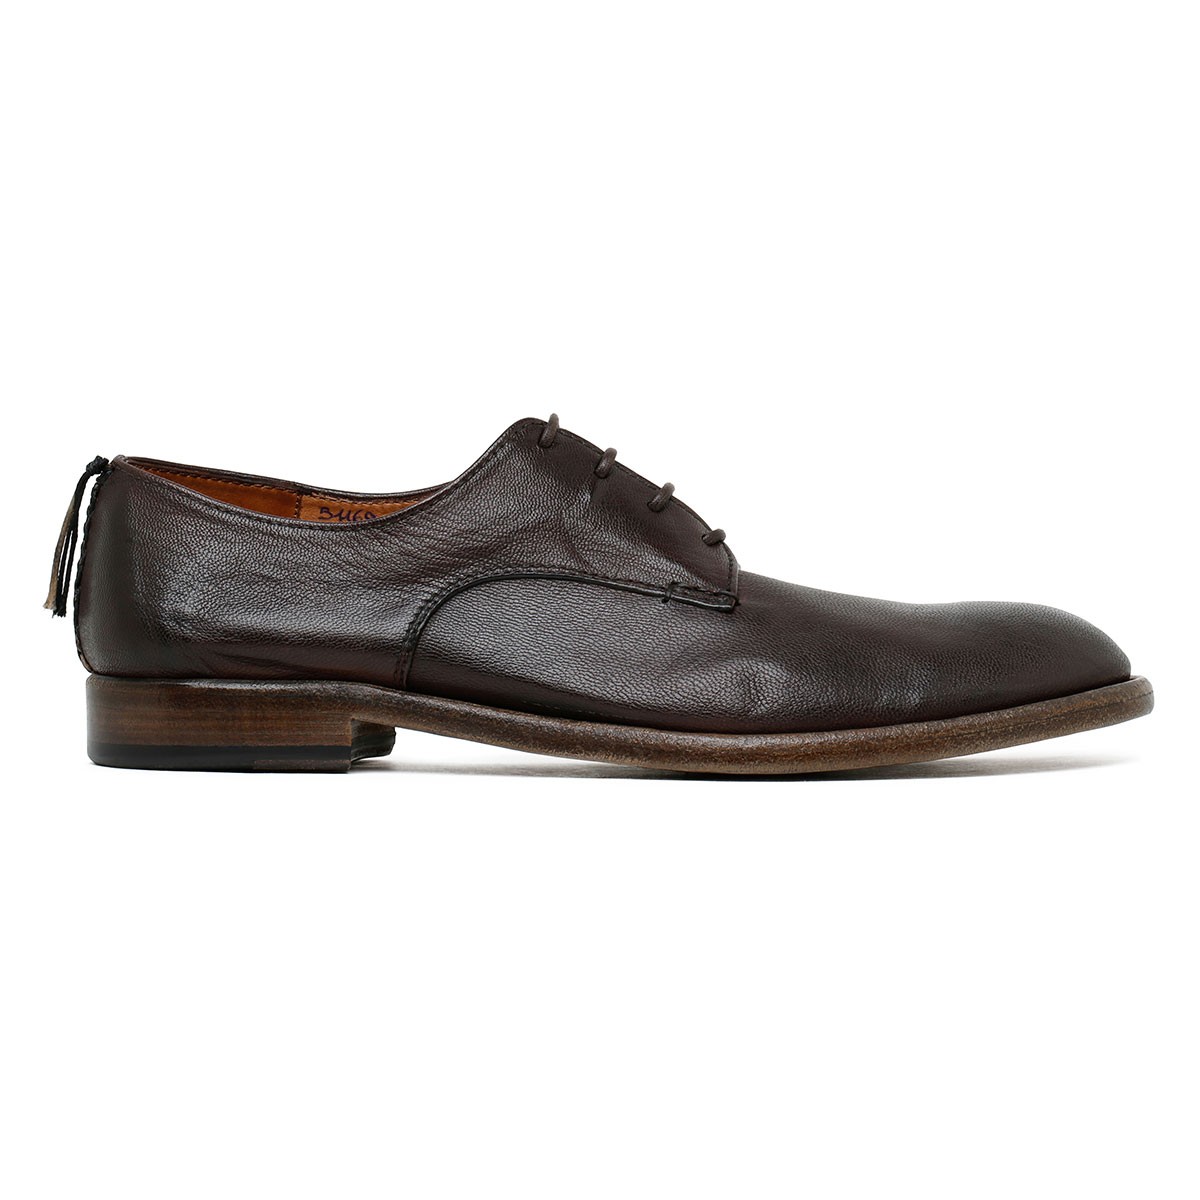 Derby shoes in chocolate Matrix leather